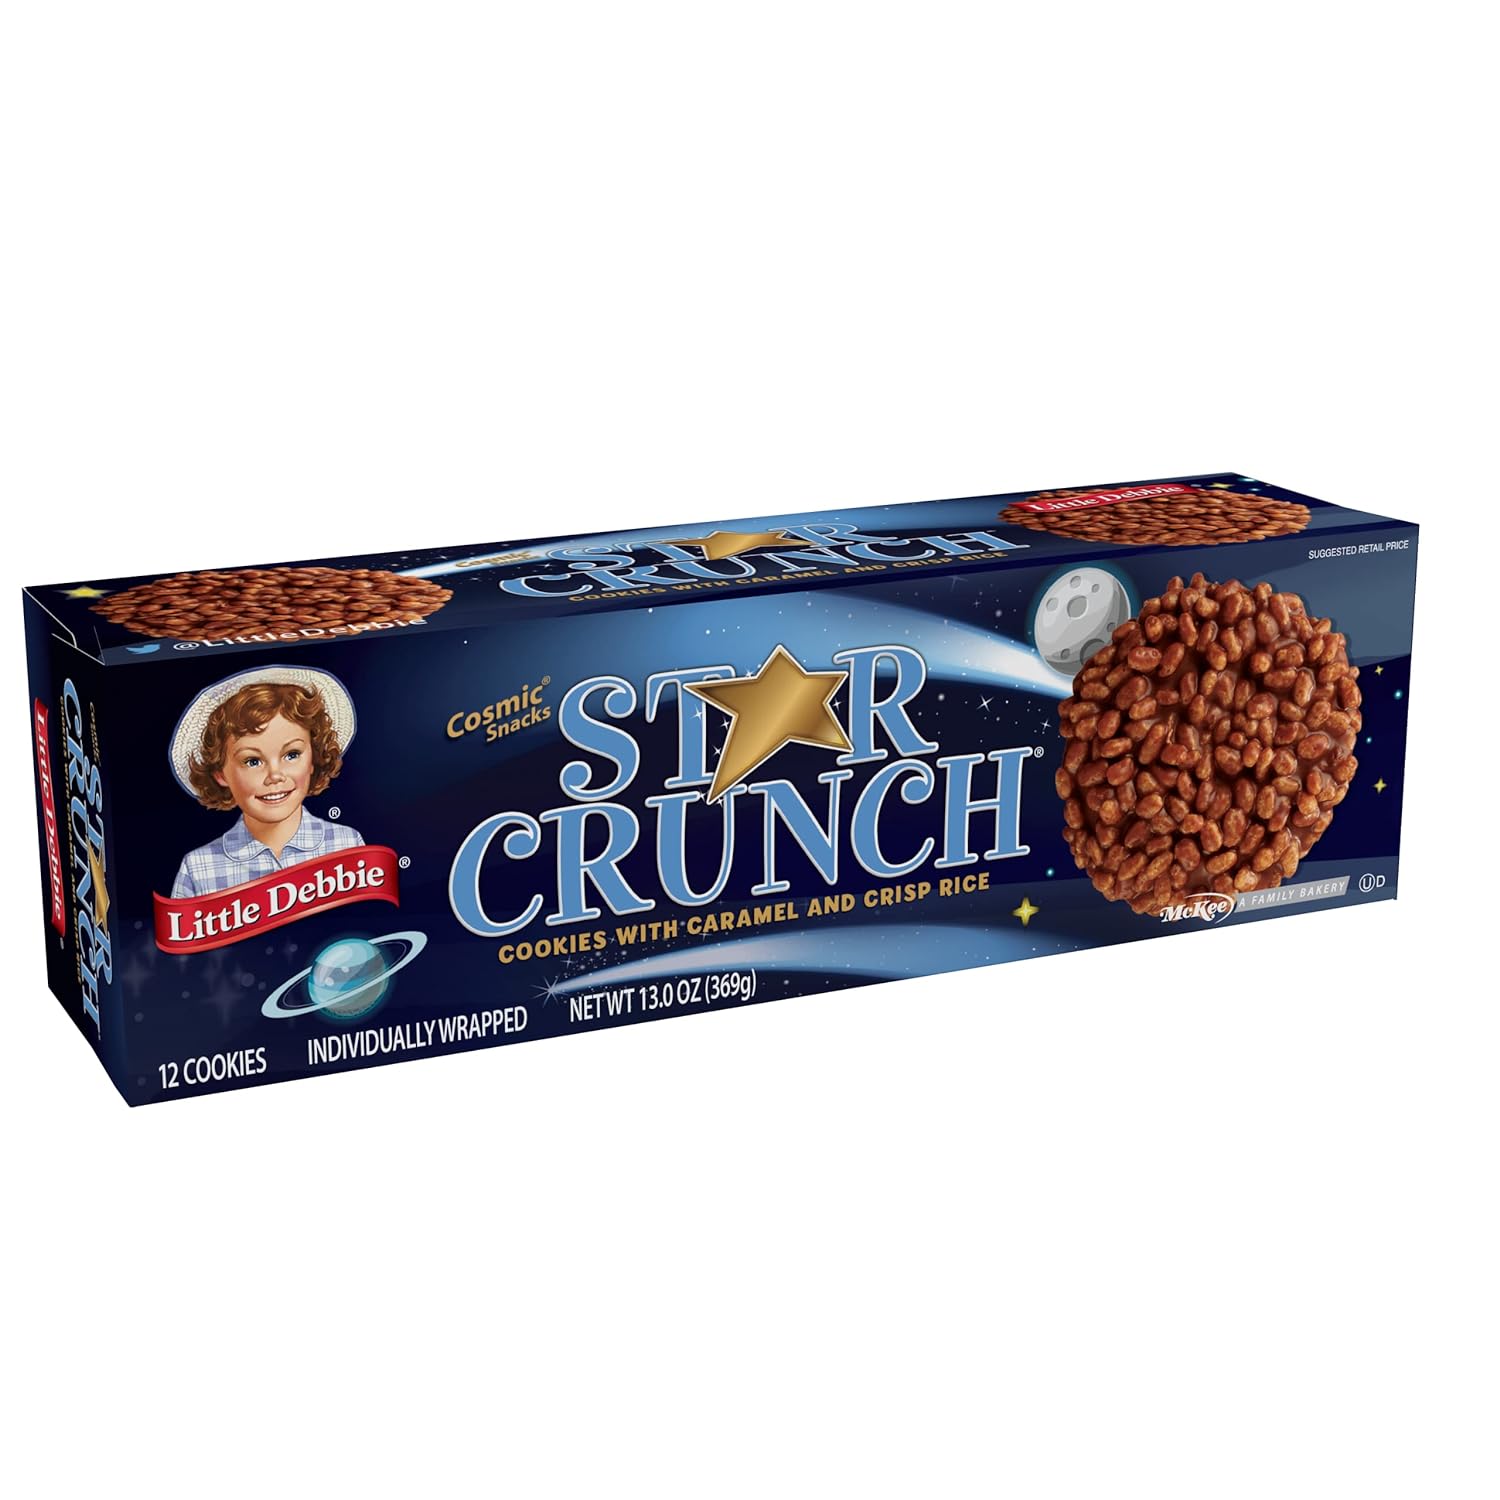 Little Debbie Star Crunch Cosmic Cookies, 96 Individually Wrapped Cookies (8 boxes) : Grocery & Gourmet Food